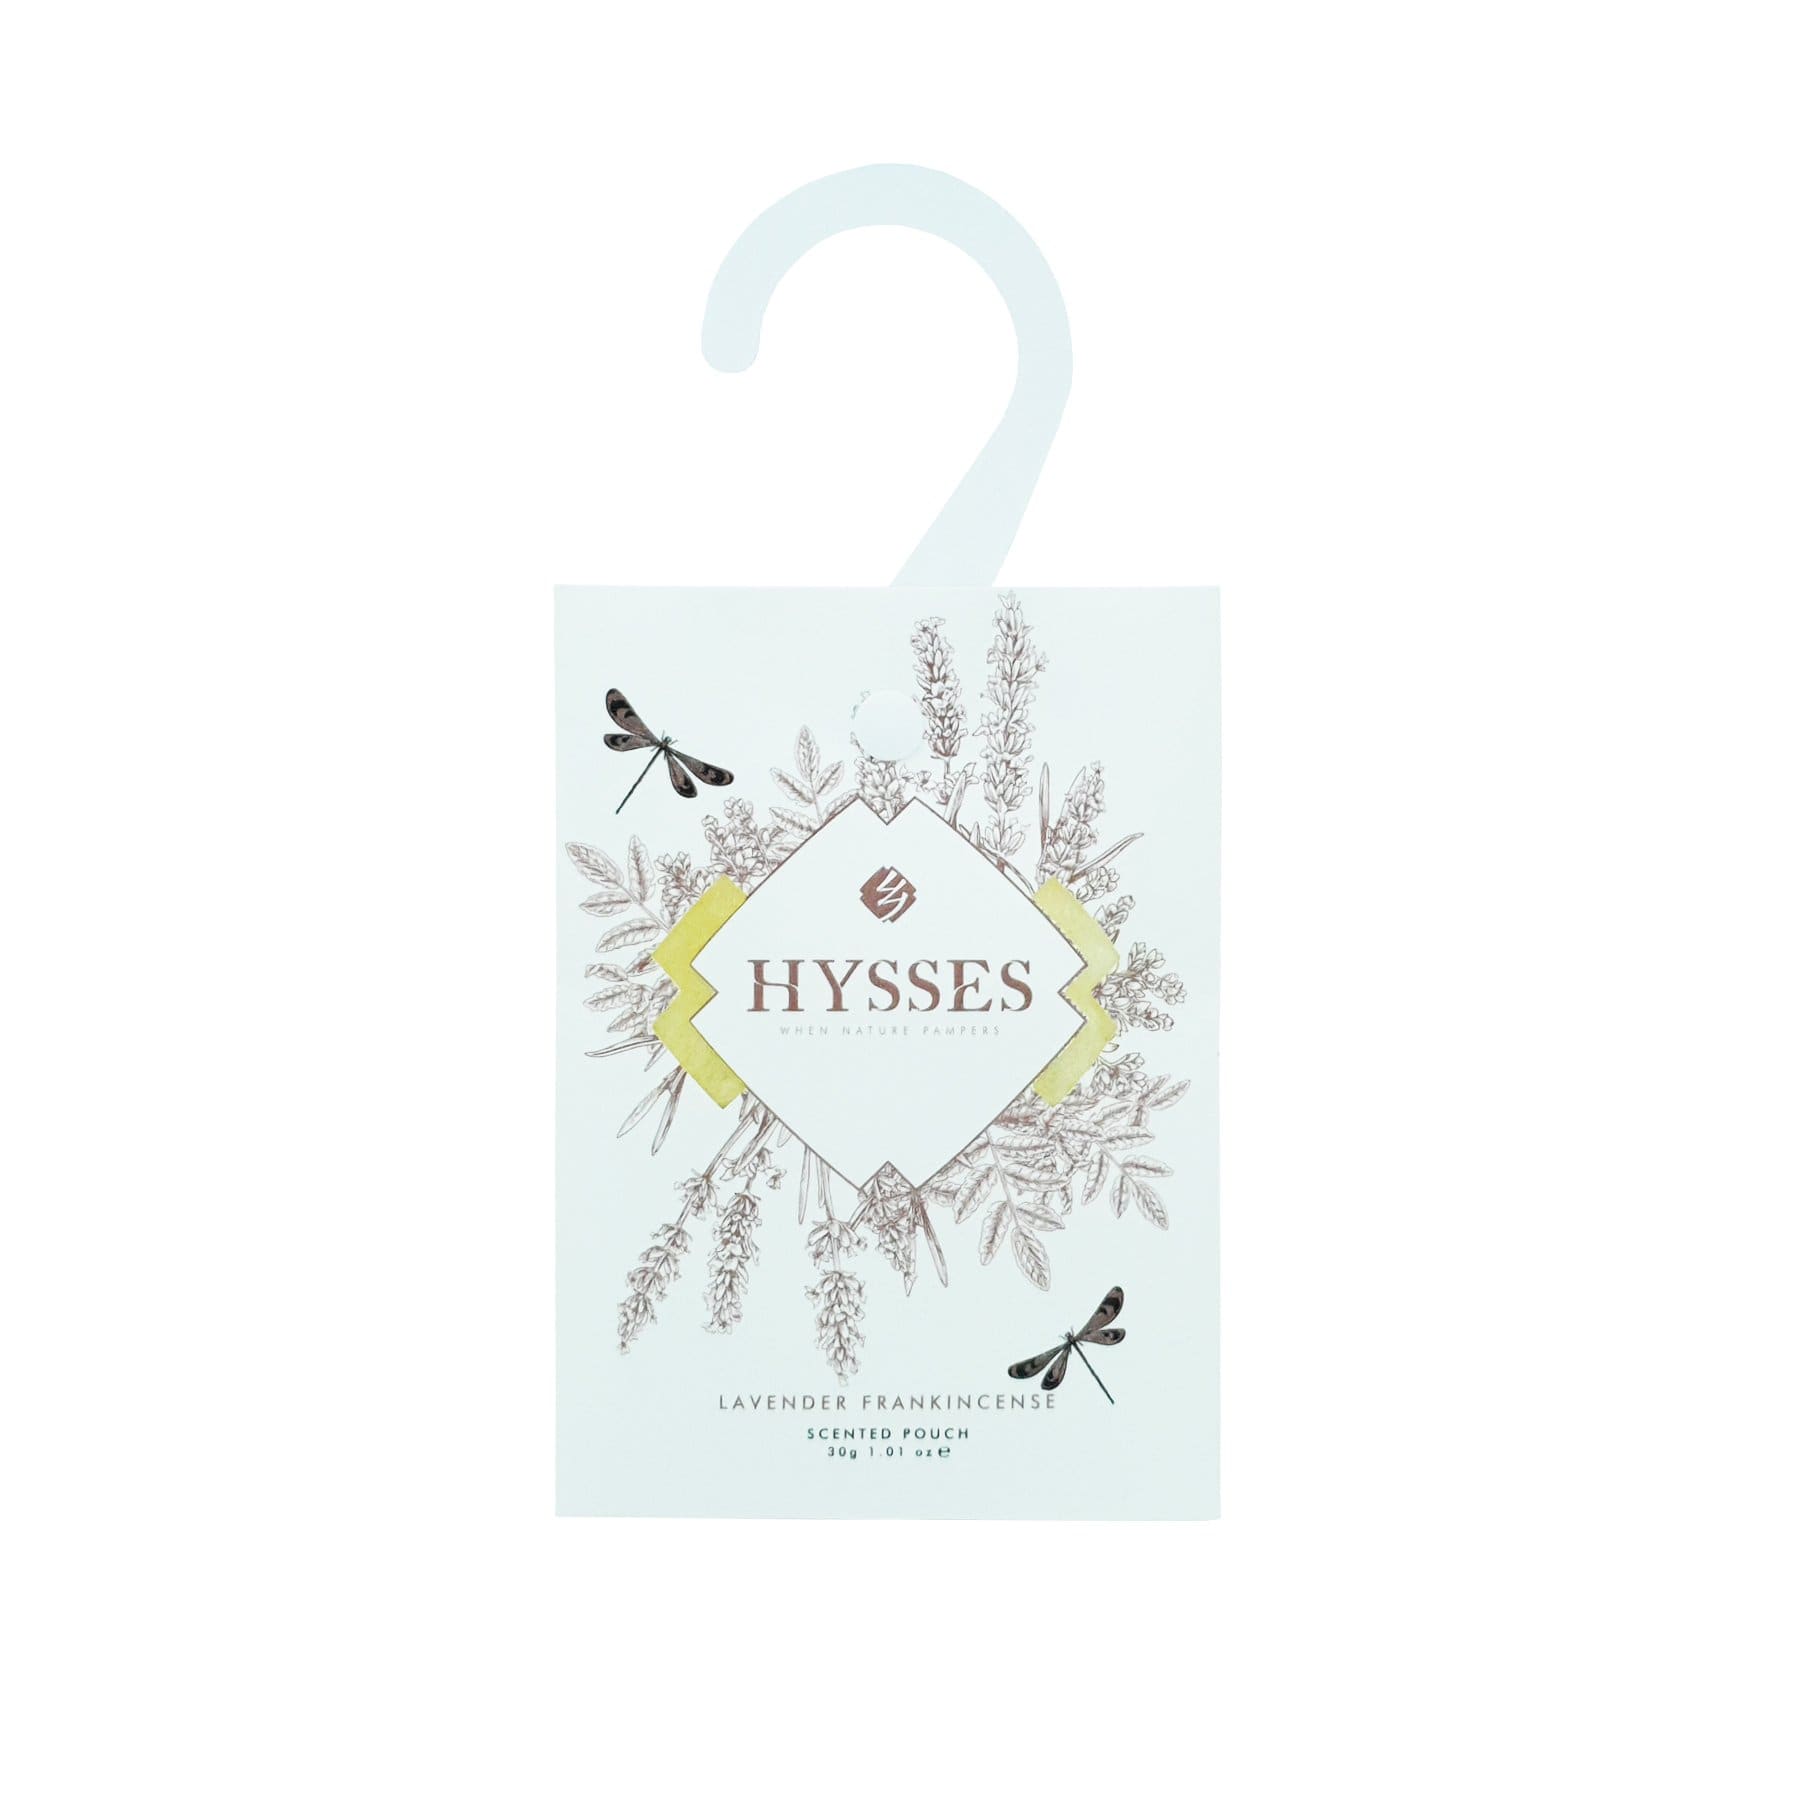 Hysses Home Scents Scented Pouch, Lavender Frankincense